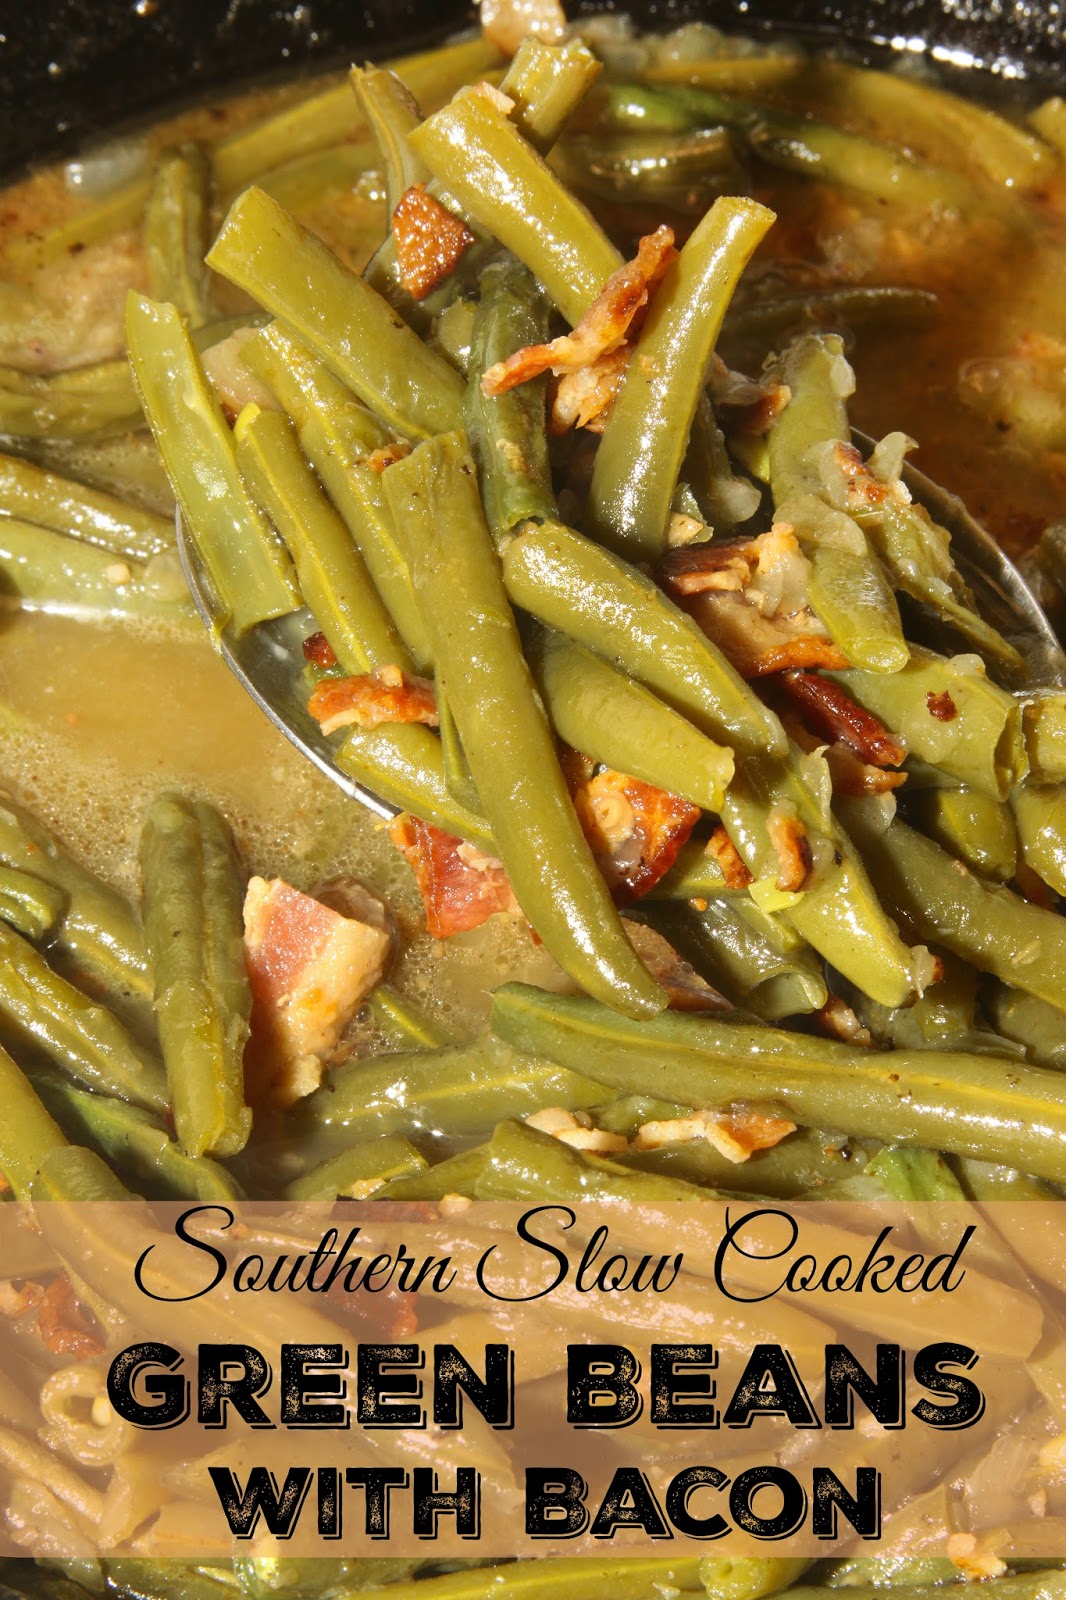 For the Love of Food: Southern Slow Cooked Green Beans with Bacon